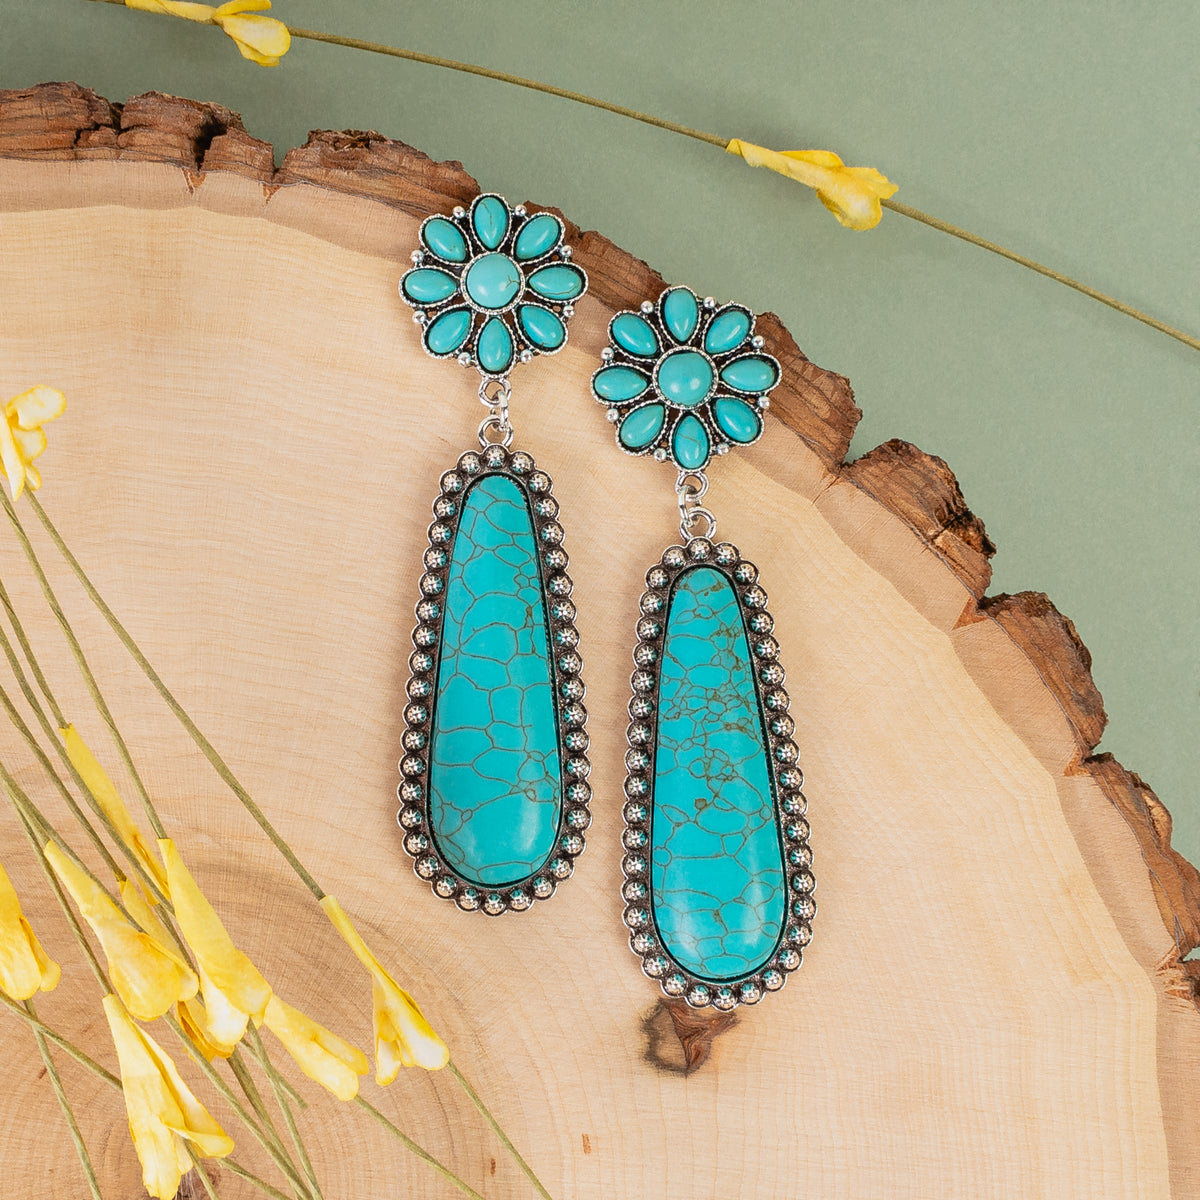 93194 - Squash Blossom Earrings - Turquoise & Silver